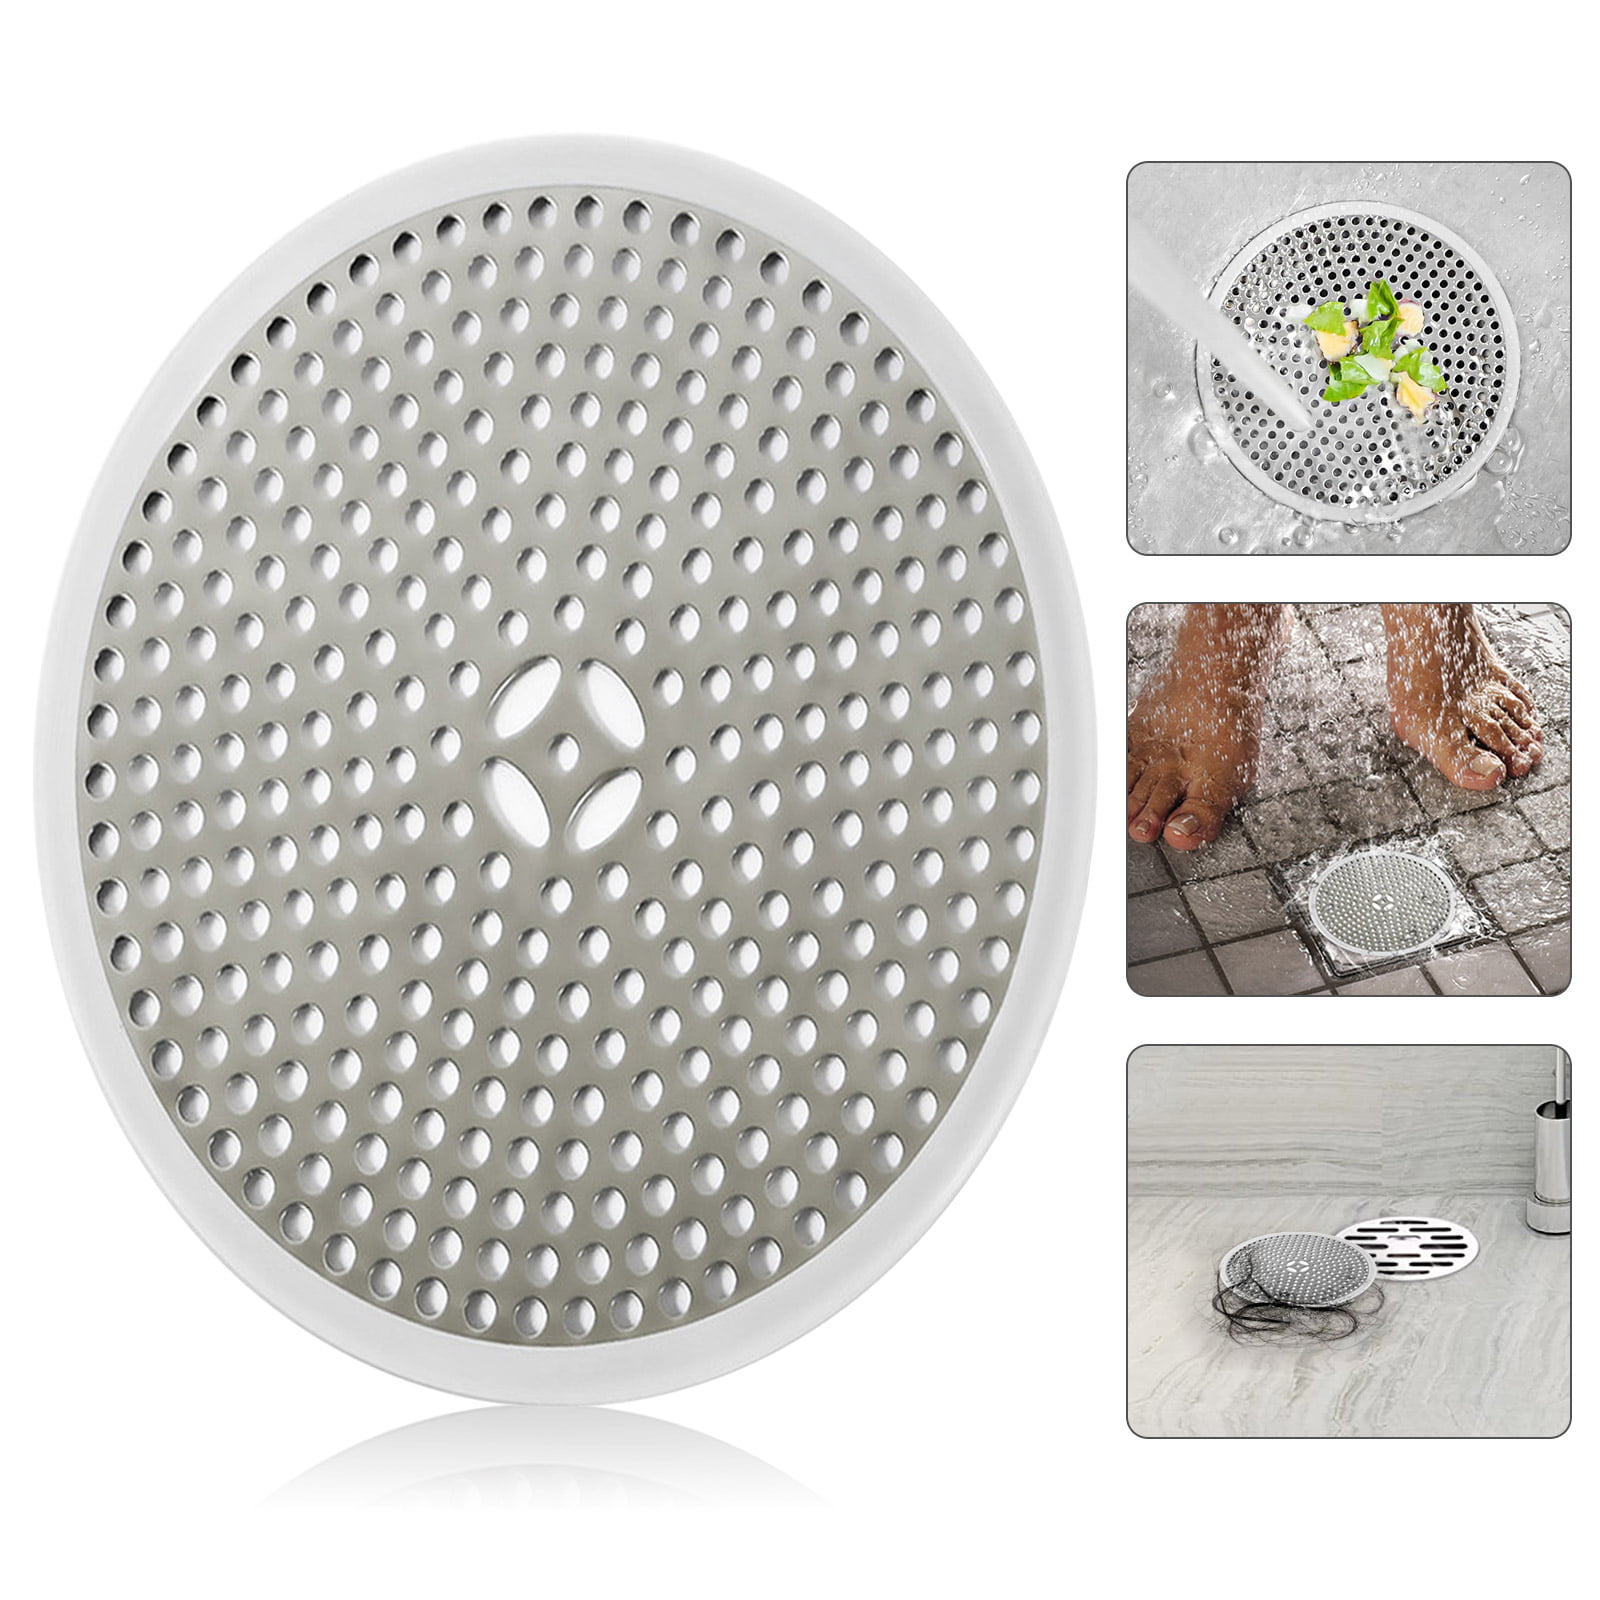 Shower Drain Hair Catcher 5.7-inch Square Drain Cover Protector Hair Stopper Trap Flat Strainer,Easy to Install,Suit for Bathroom Floor Drain,Stainless Steel and Silicone Grey 